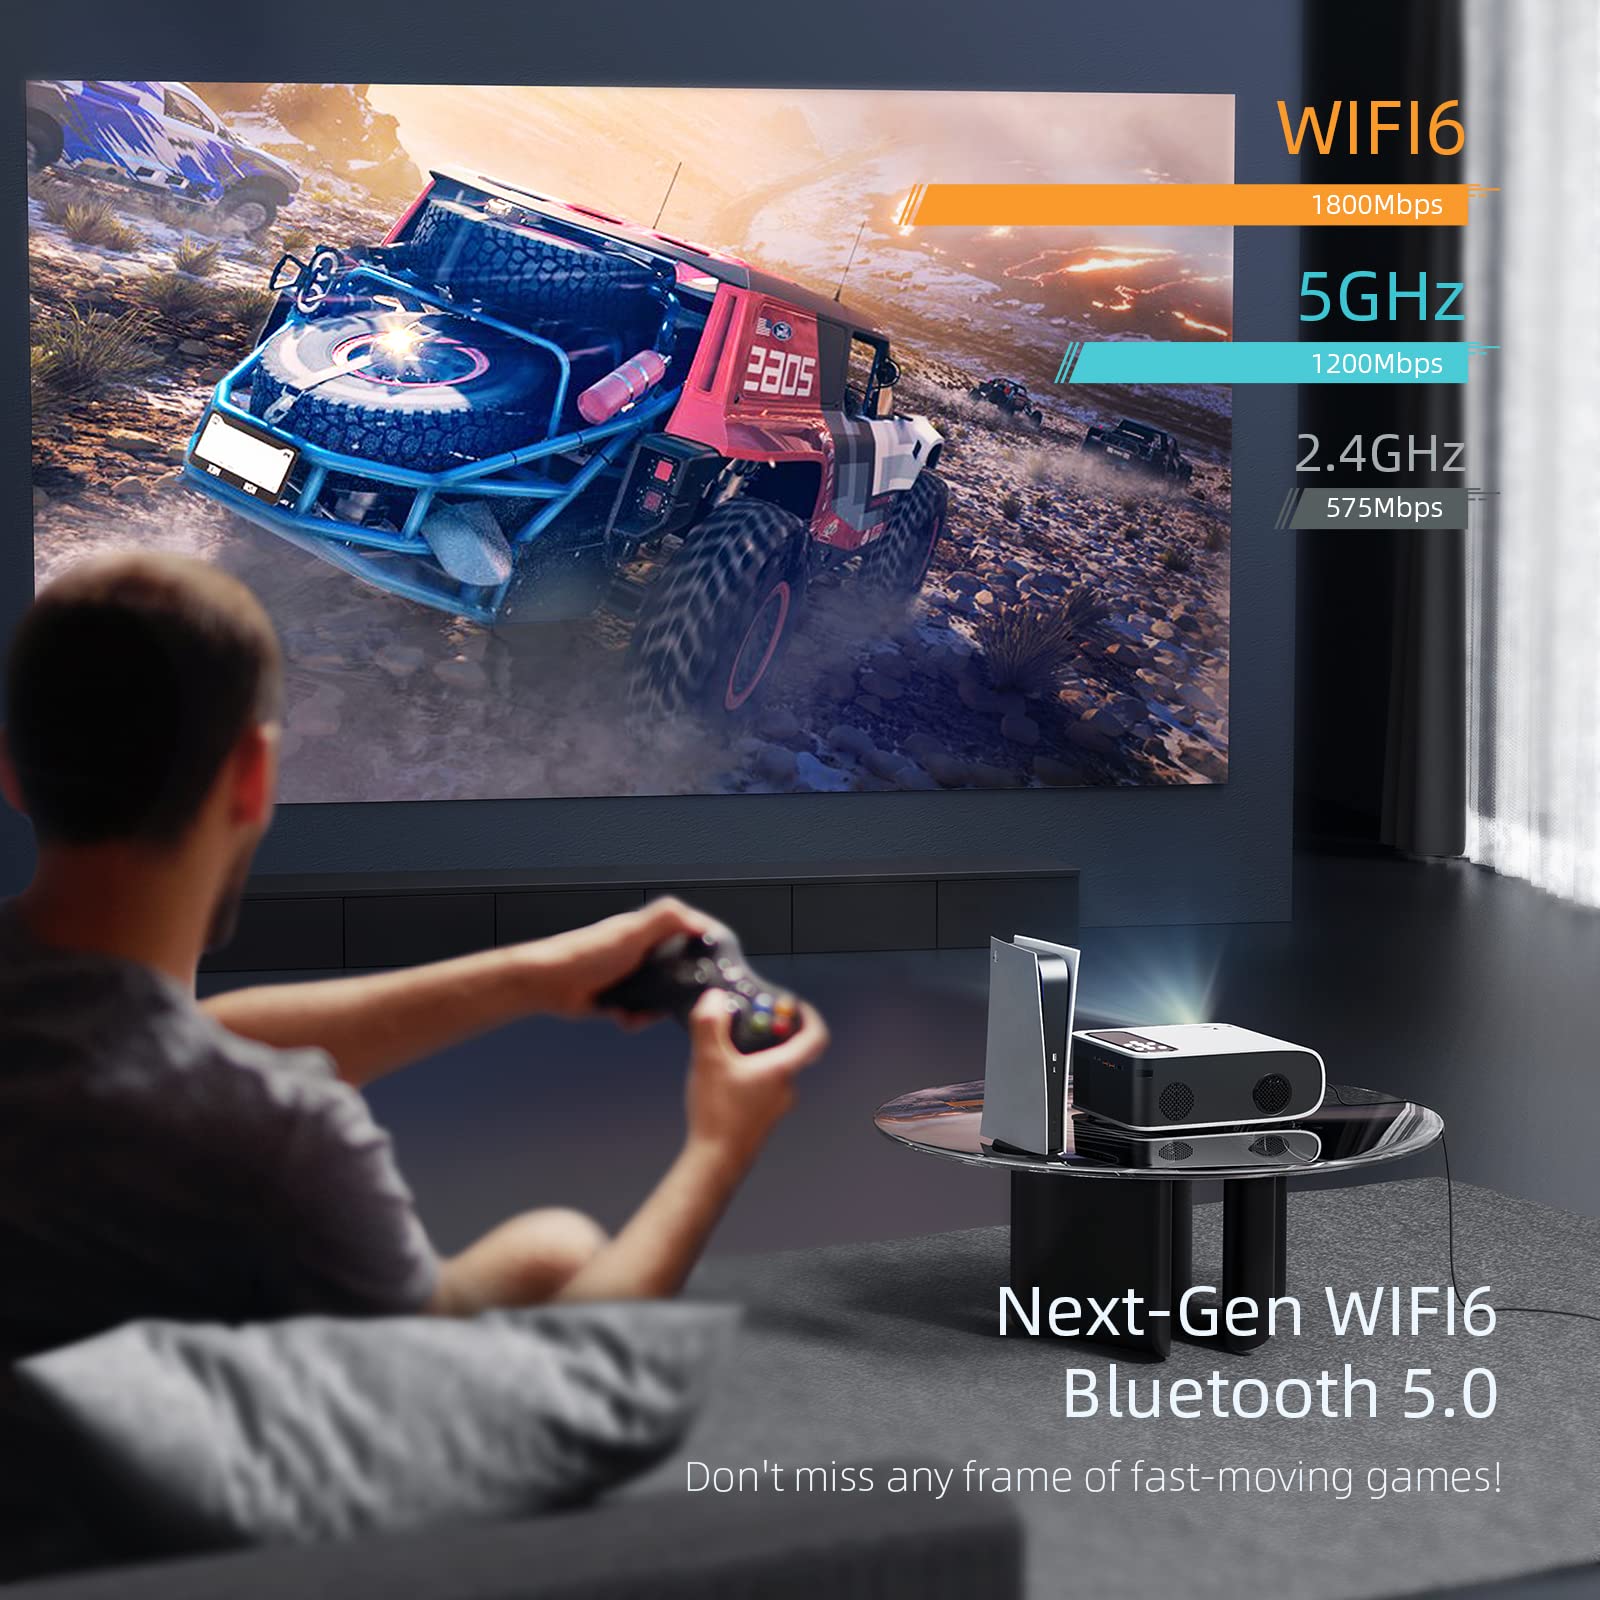 Projector Wifi 6 Bluetooth,YABER Pro V8 450 ANSI Lumen Native 1080P HD Projector,4K Supported,4P/4D Keystone Correction,-50% Zoom,250" Display Home & Outdoor Projector for TV Stick, Android, iOS